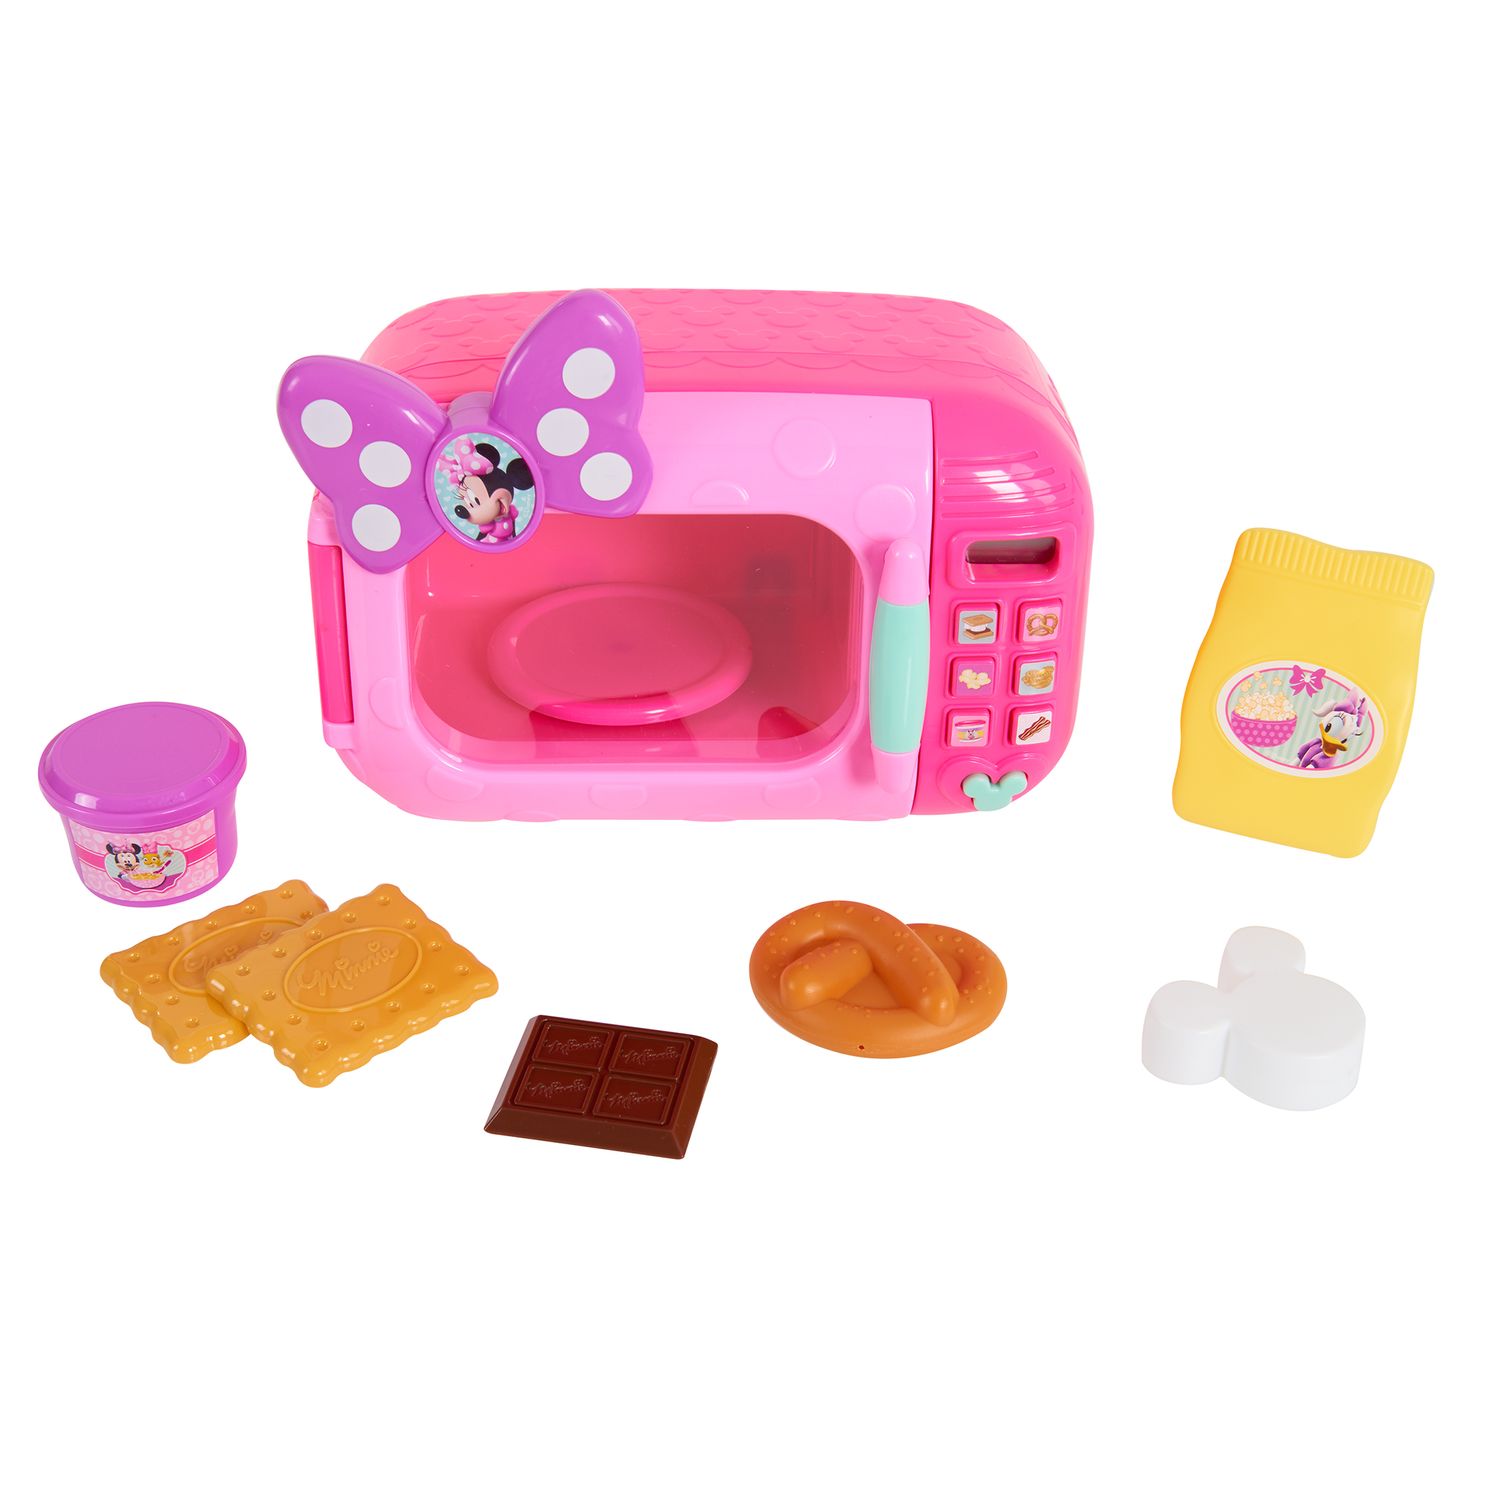 Image for Disney 's Minnie Mouse Happy Helpers Marvelous Microwave Set at Kohl's.